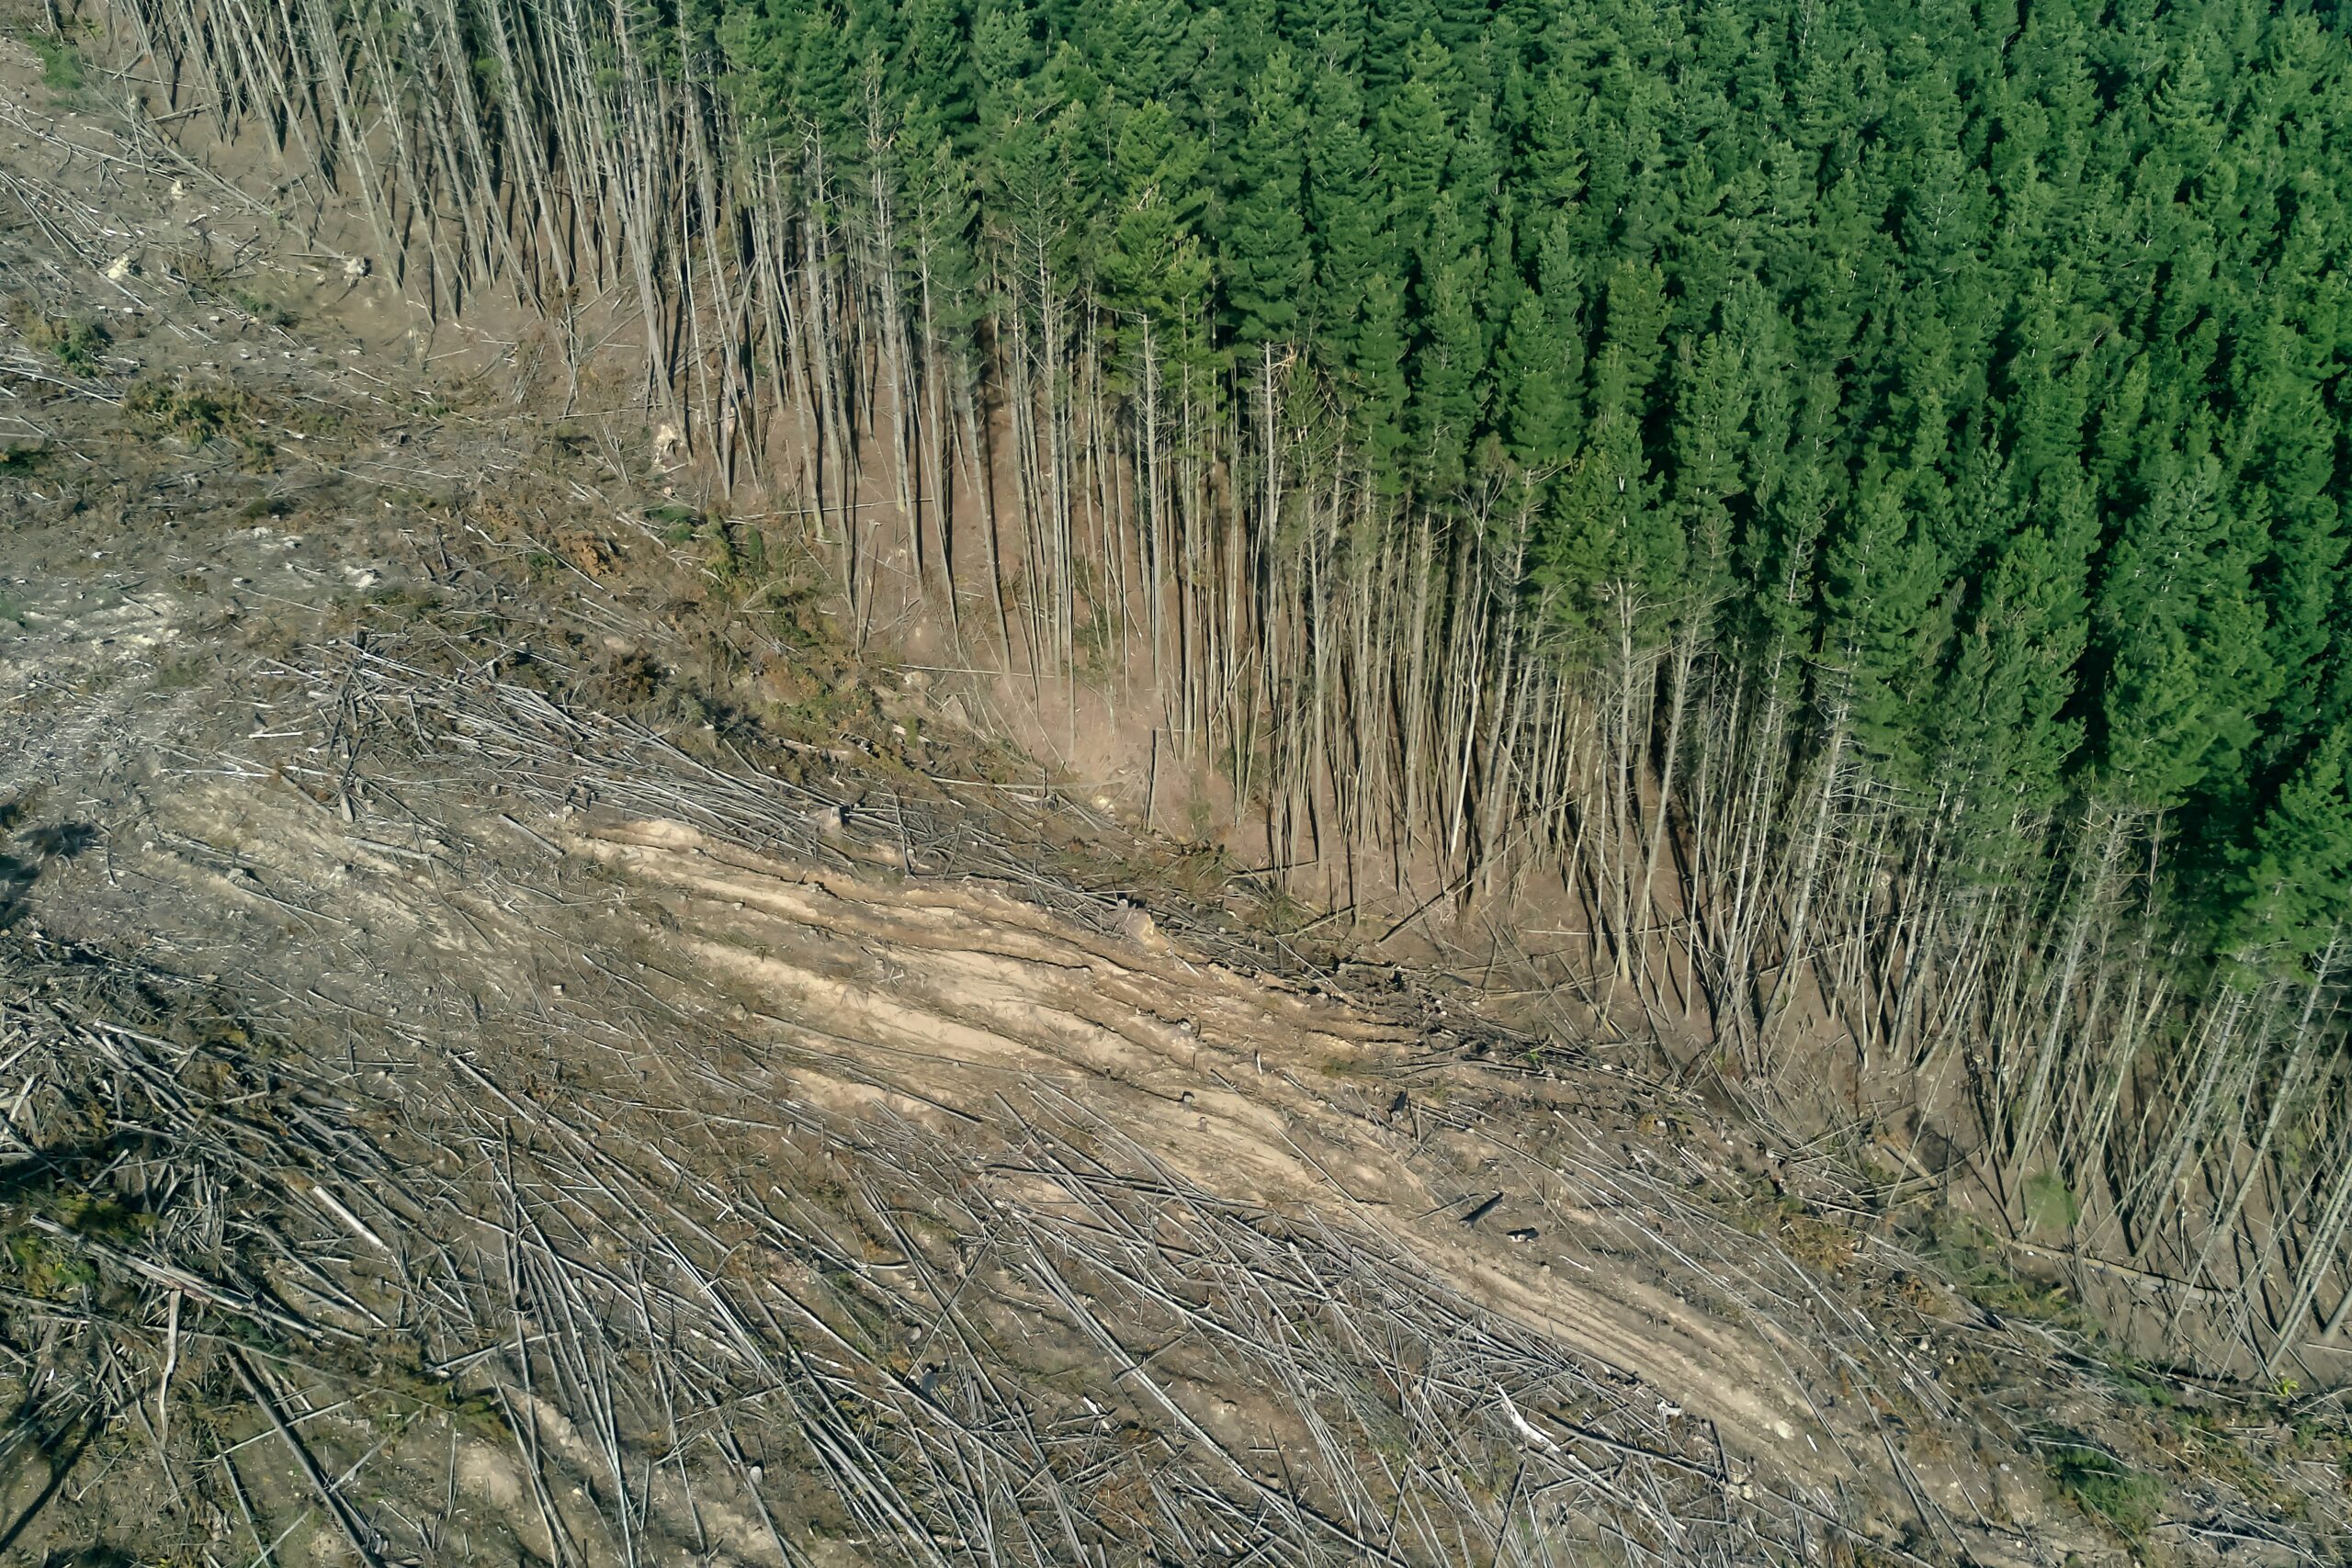 Deforestation paper production - smart to plan paper conservation and climate protection